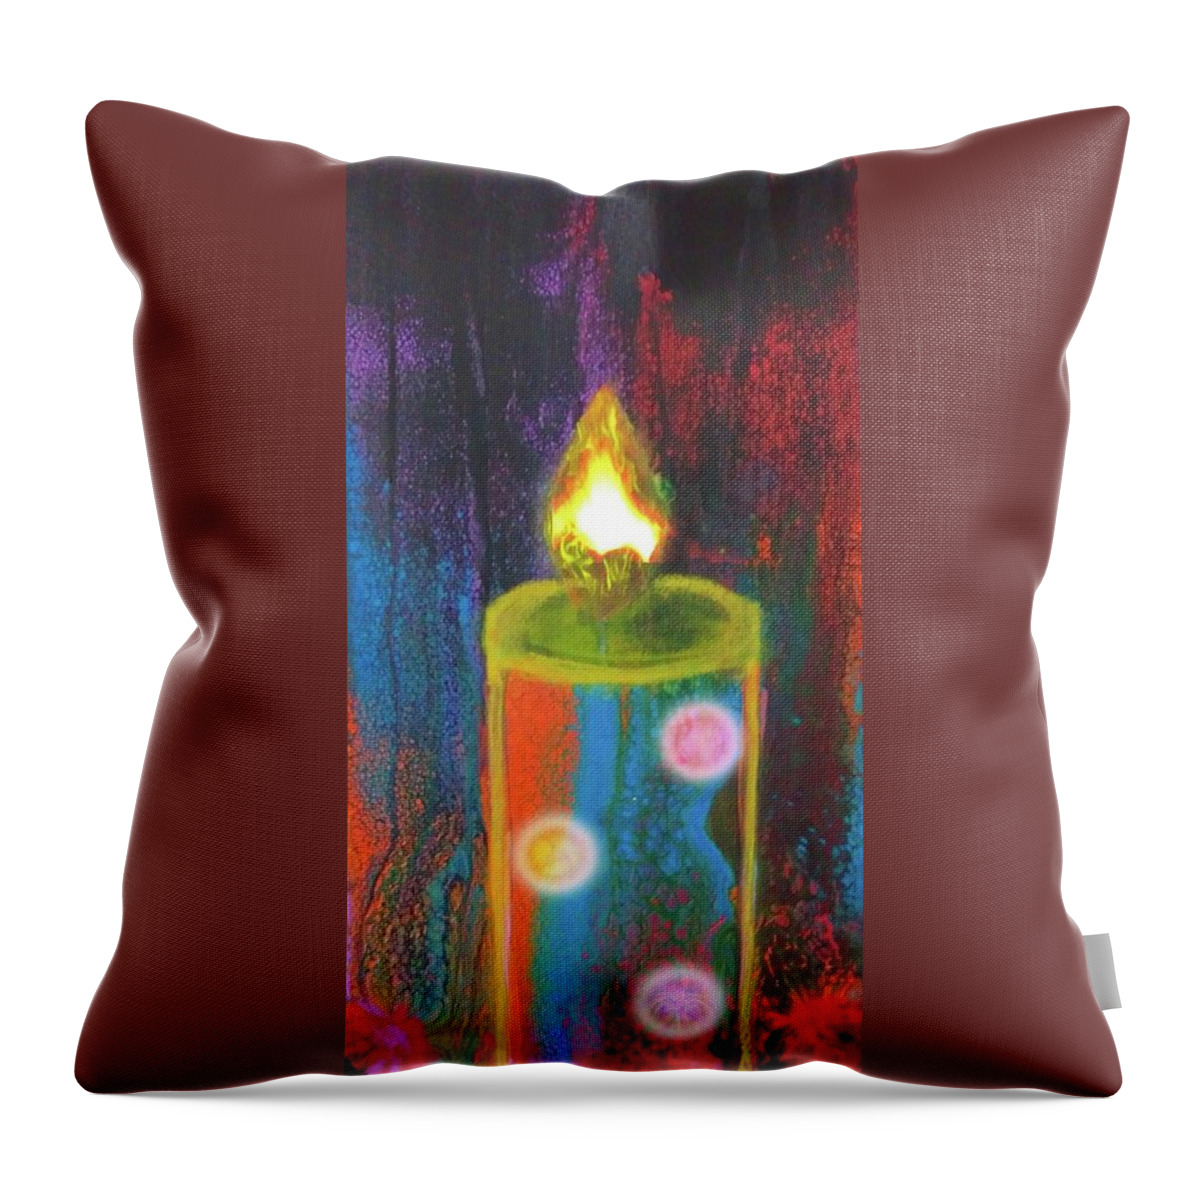 Candle Throw Pillow featuring the mixed media Candle In The Rain by Anna Adams